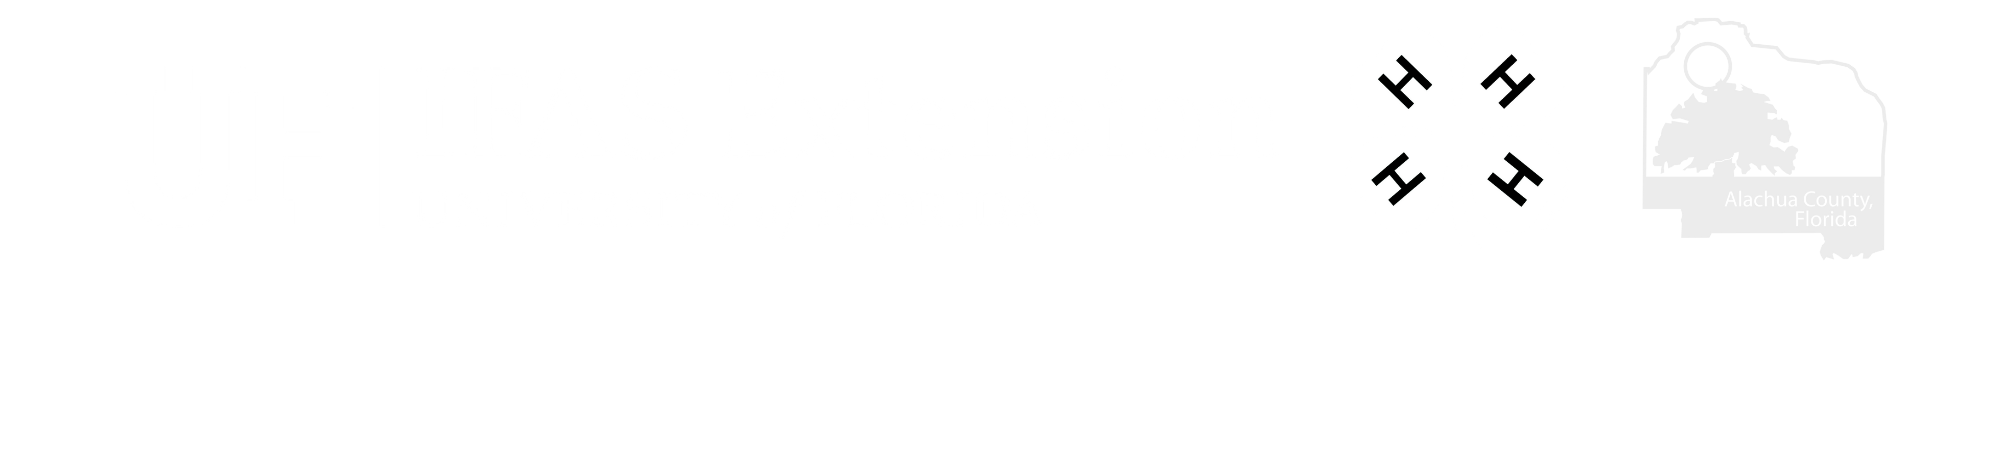 White UF/IFAS Extension, 4-H, and Alachua County Logos